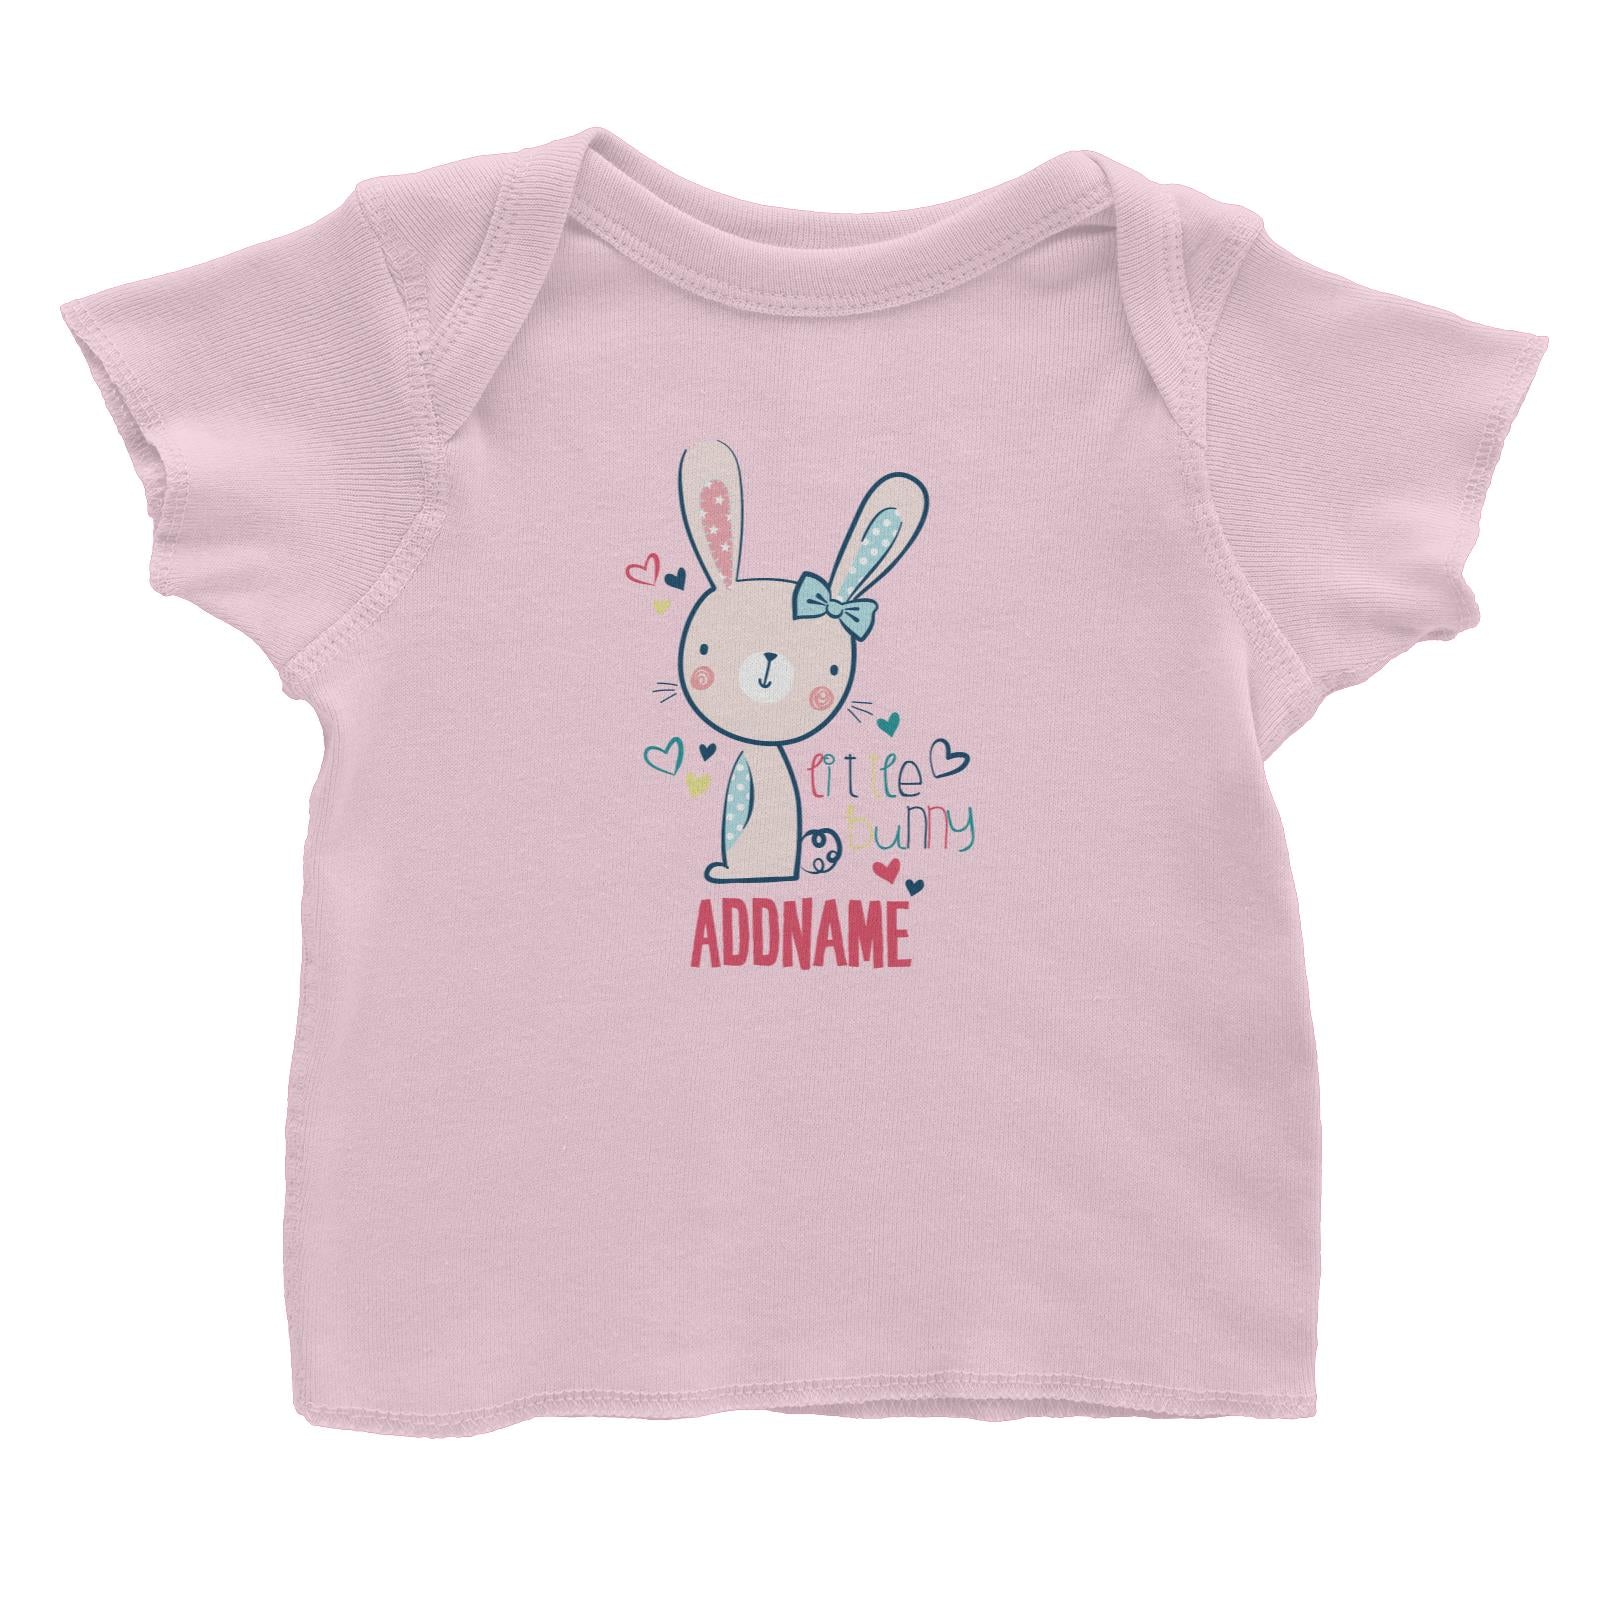 Cool Vibrant Series Cute Little Bunny Addname Baby T-Shirt